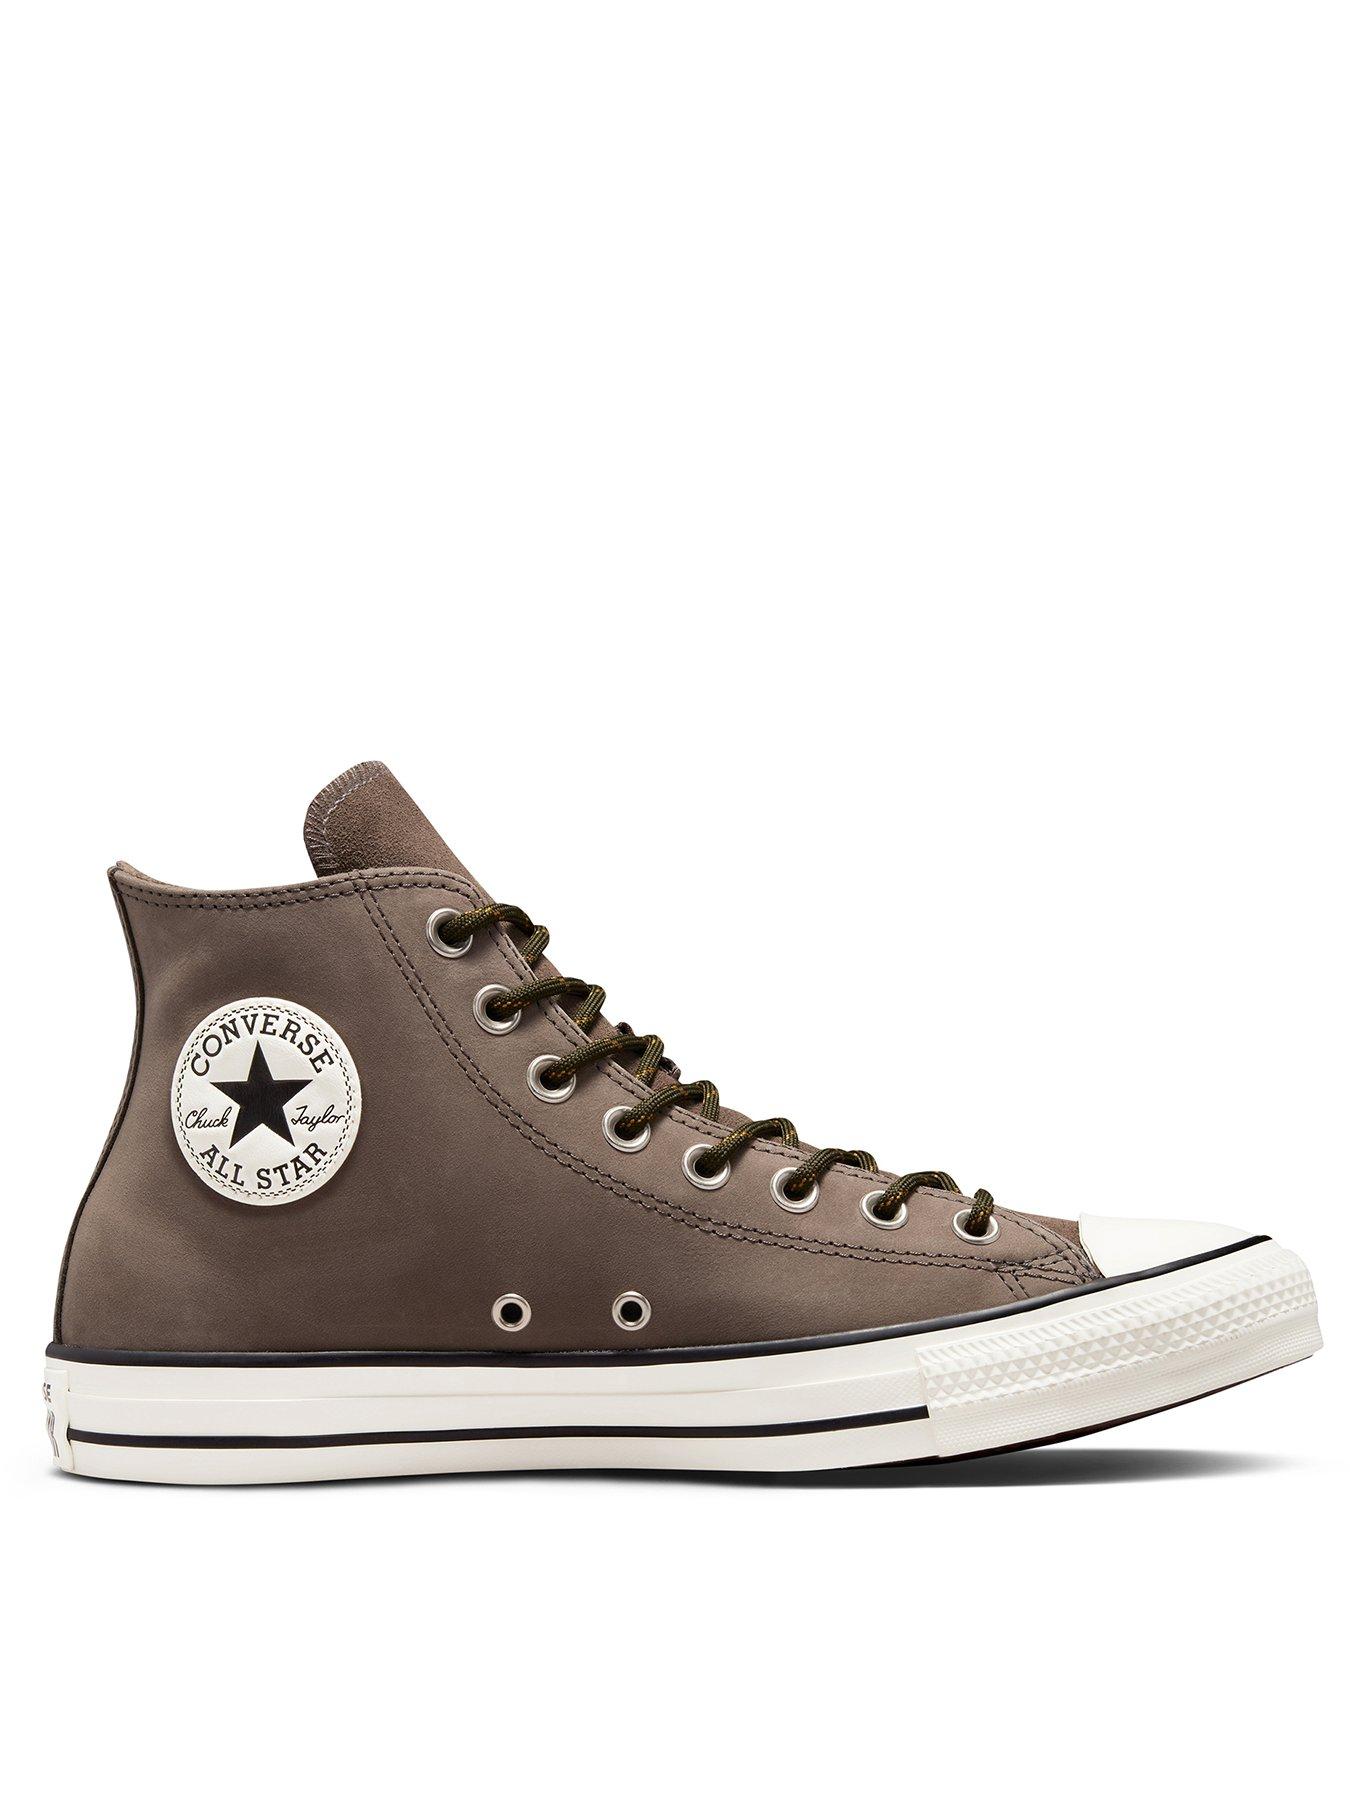 Converse Chuck Taylor All Star Suede Hi-Tops Brown/White |